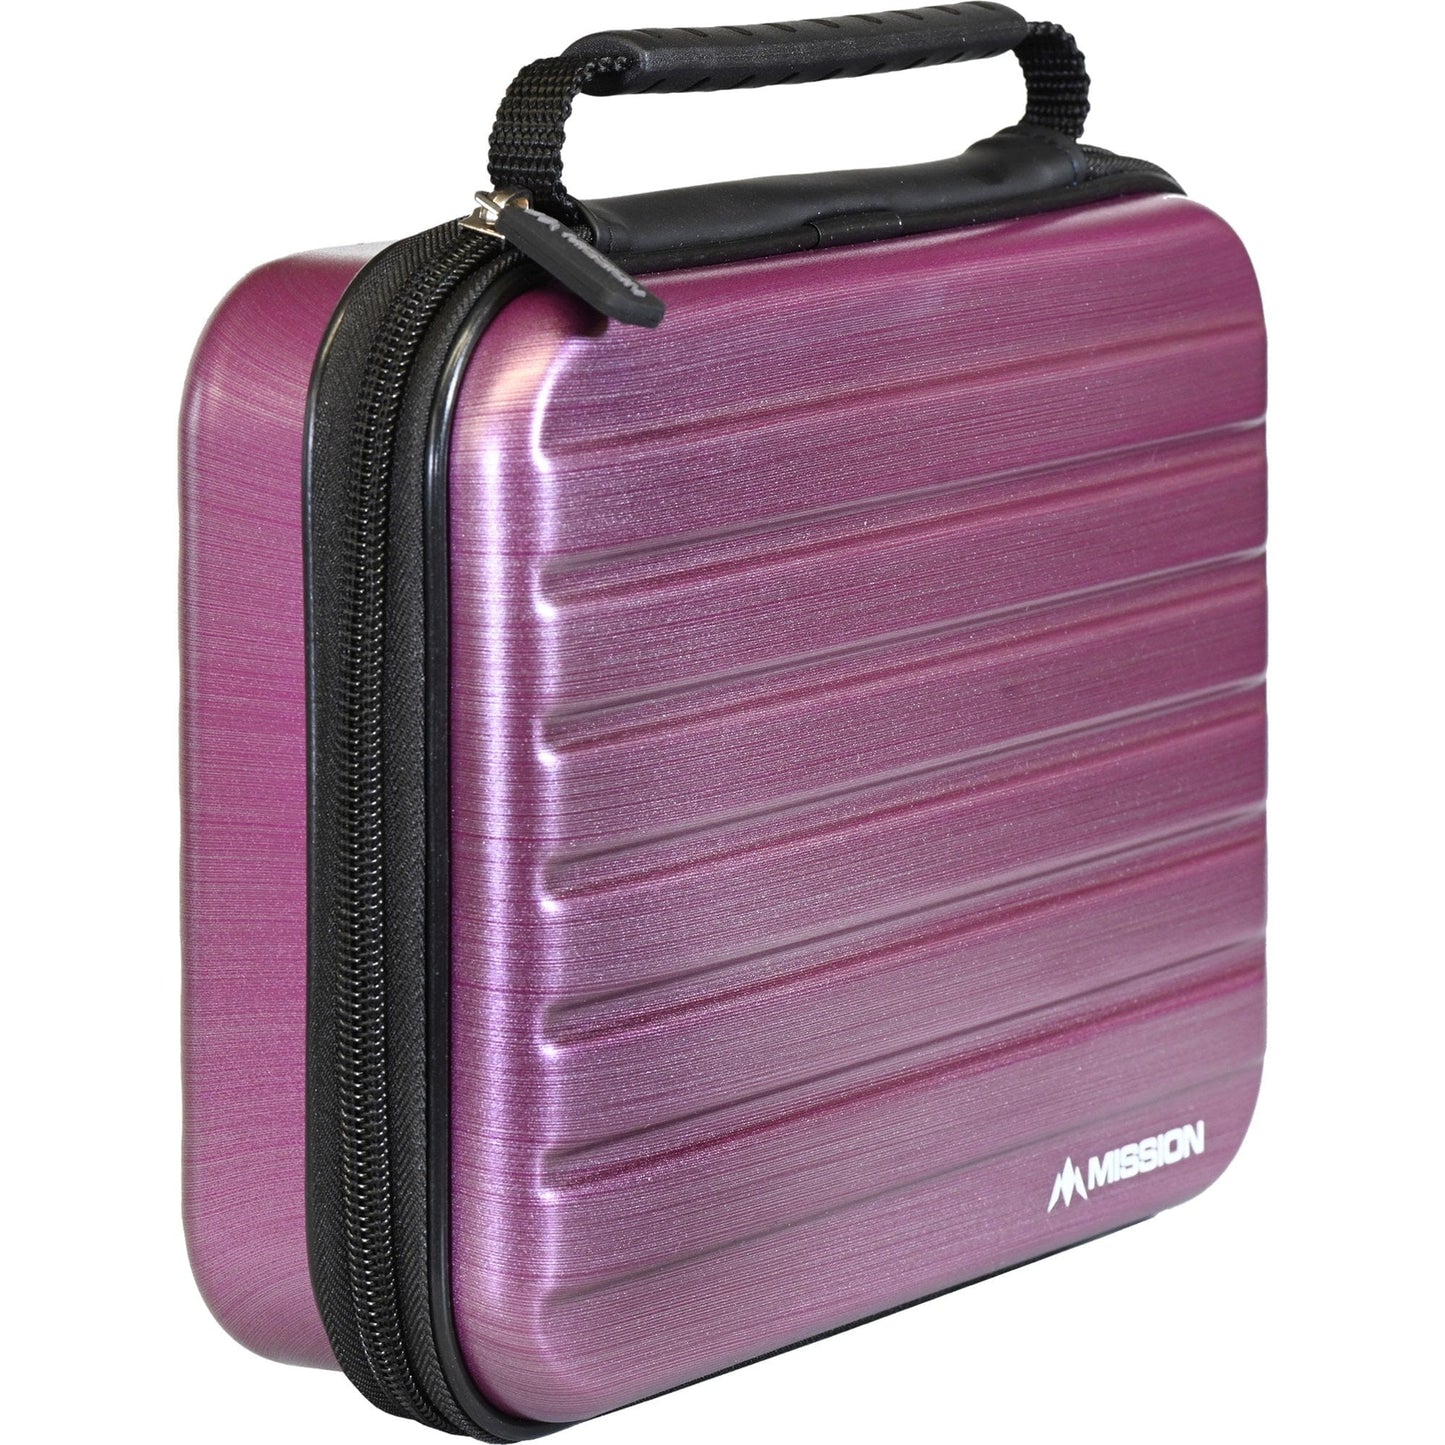 Mission ABS-4 Darts Case - Strong Protection - Metallic Purple